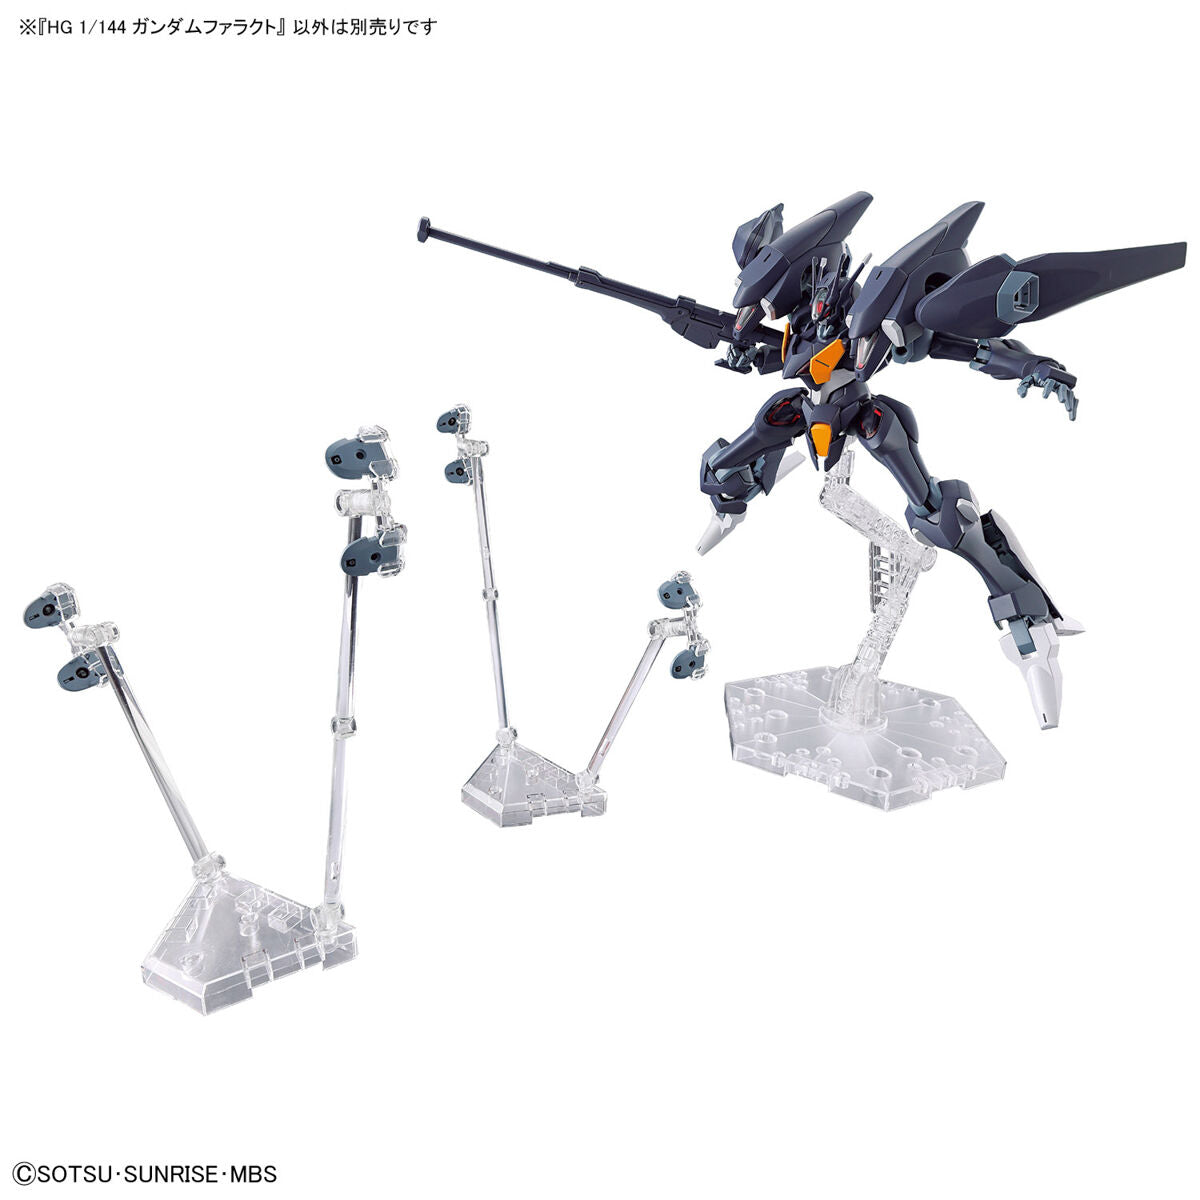 Gundam Planet - 30MM Armored Core VI: Fires of Rubicon Weapon Set 01